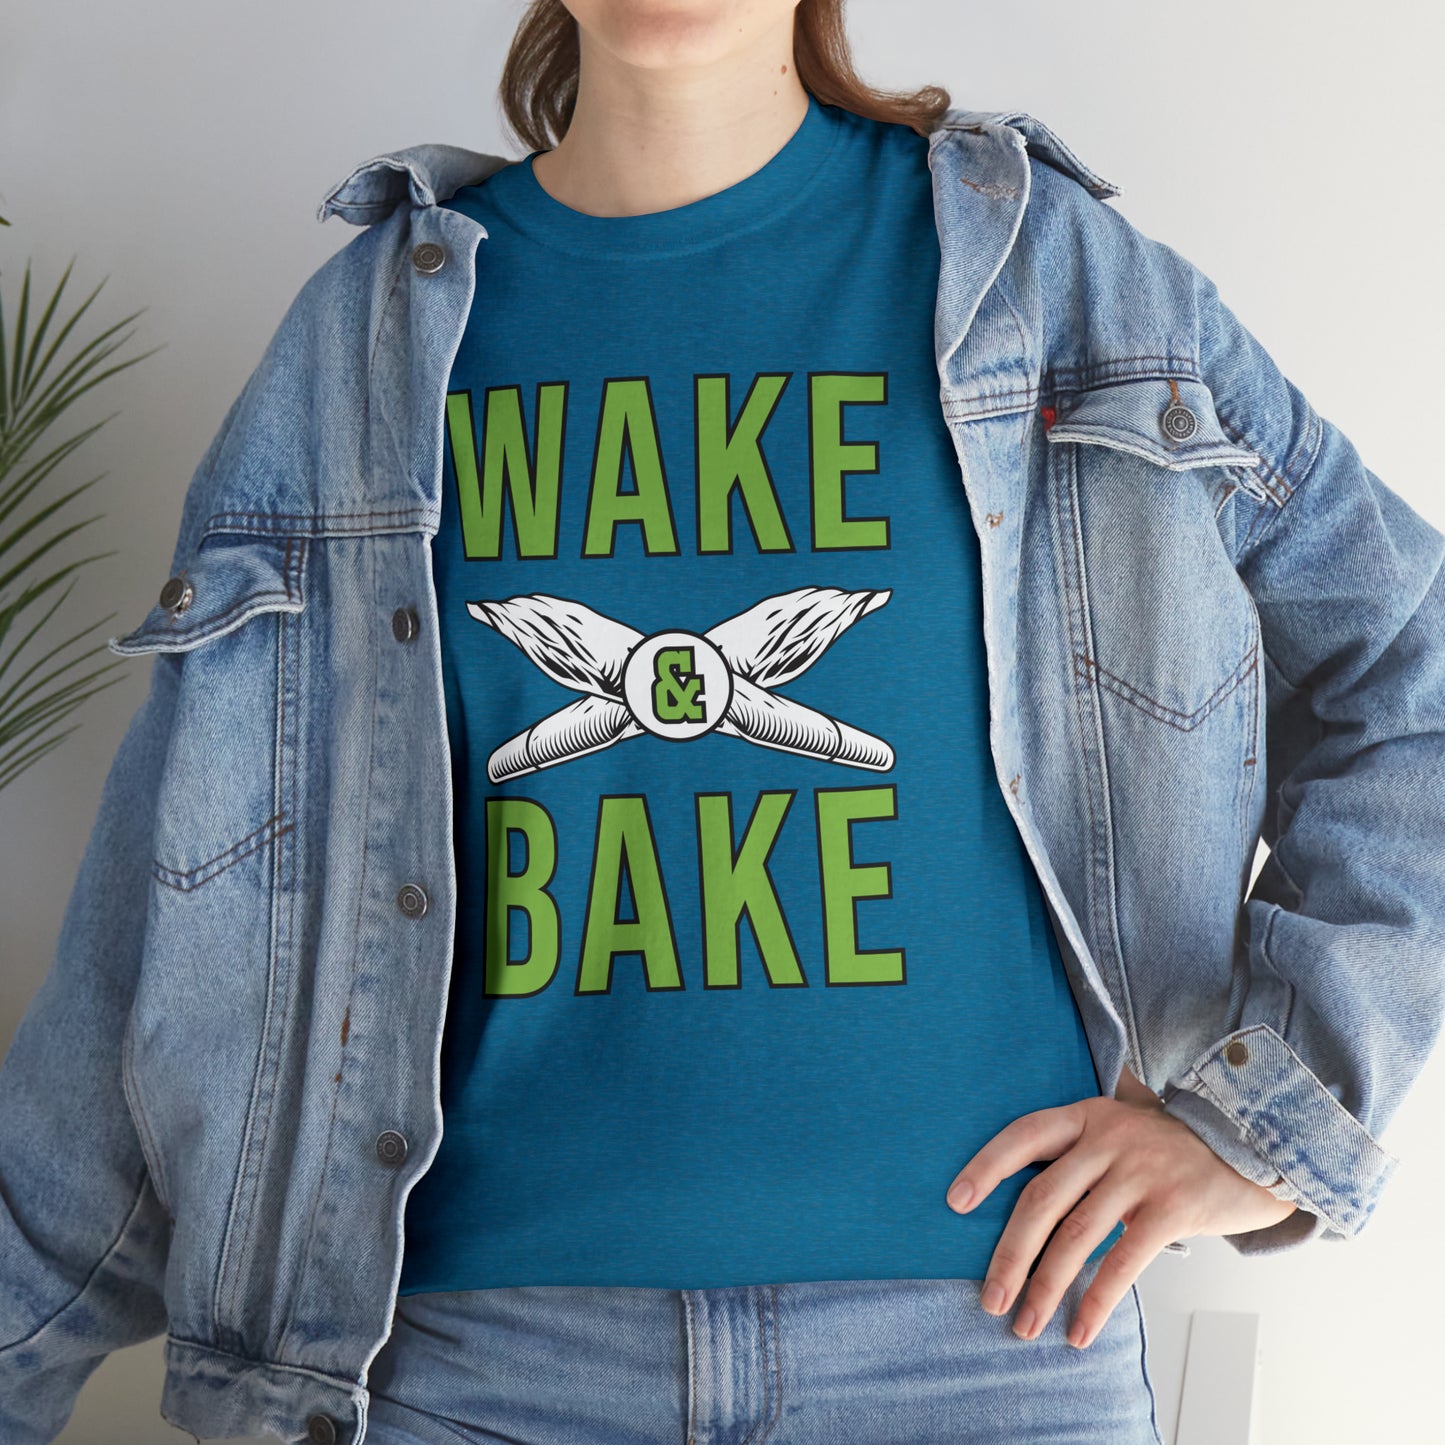 "Wake & Bake" T-Shirt - Weave Got Gifts - Unique Gifts You Won’t Find Anywhere Else!